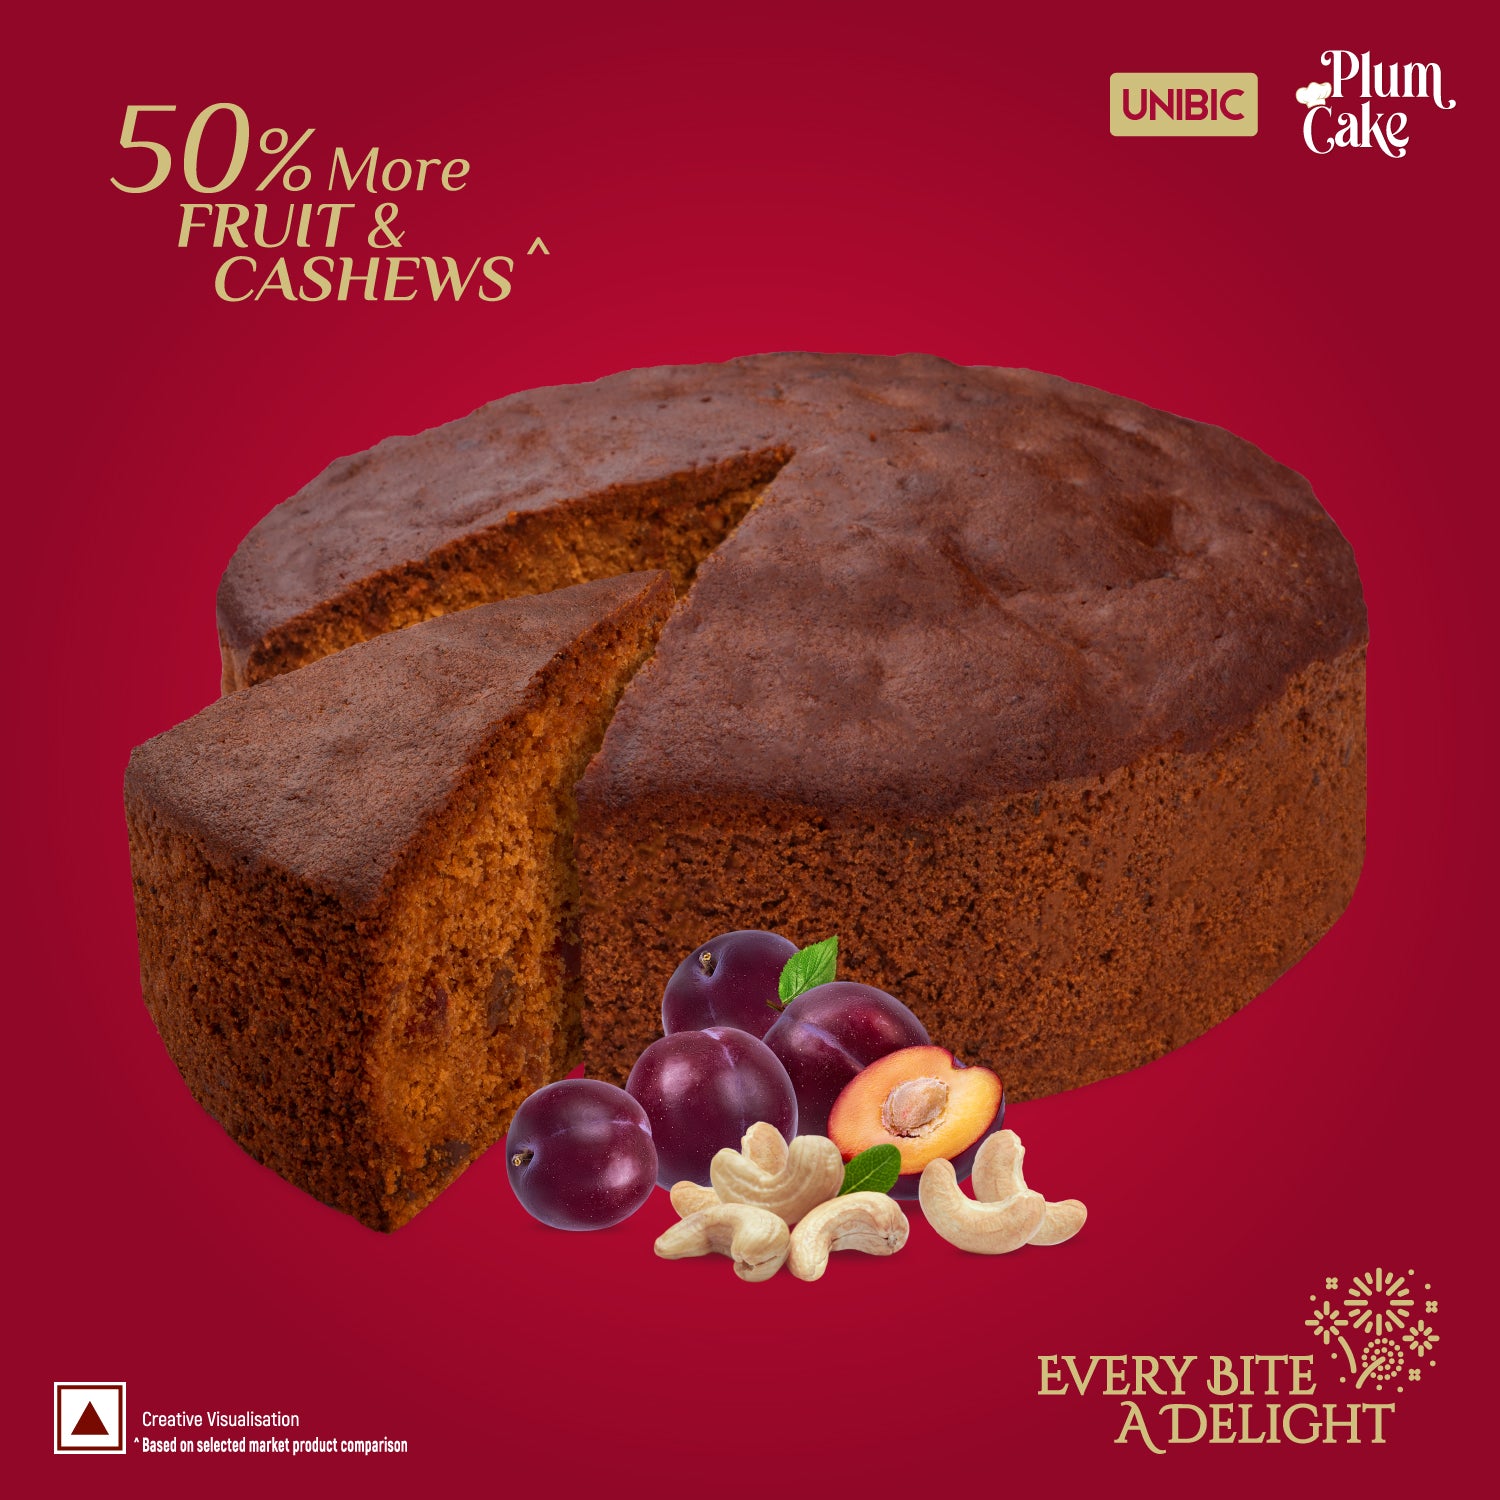 SOFT & SWEET - Rich plum cake with red wine... For order message or call on  this no - 6291943327 | Facebook